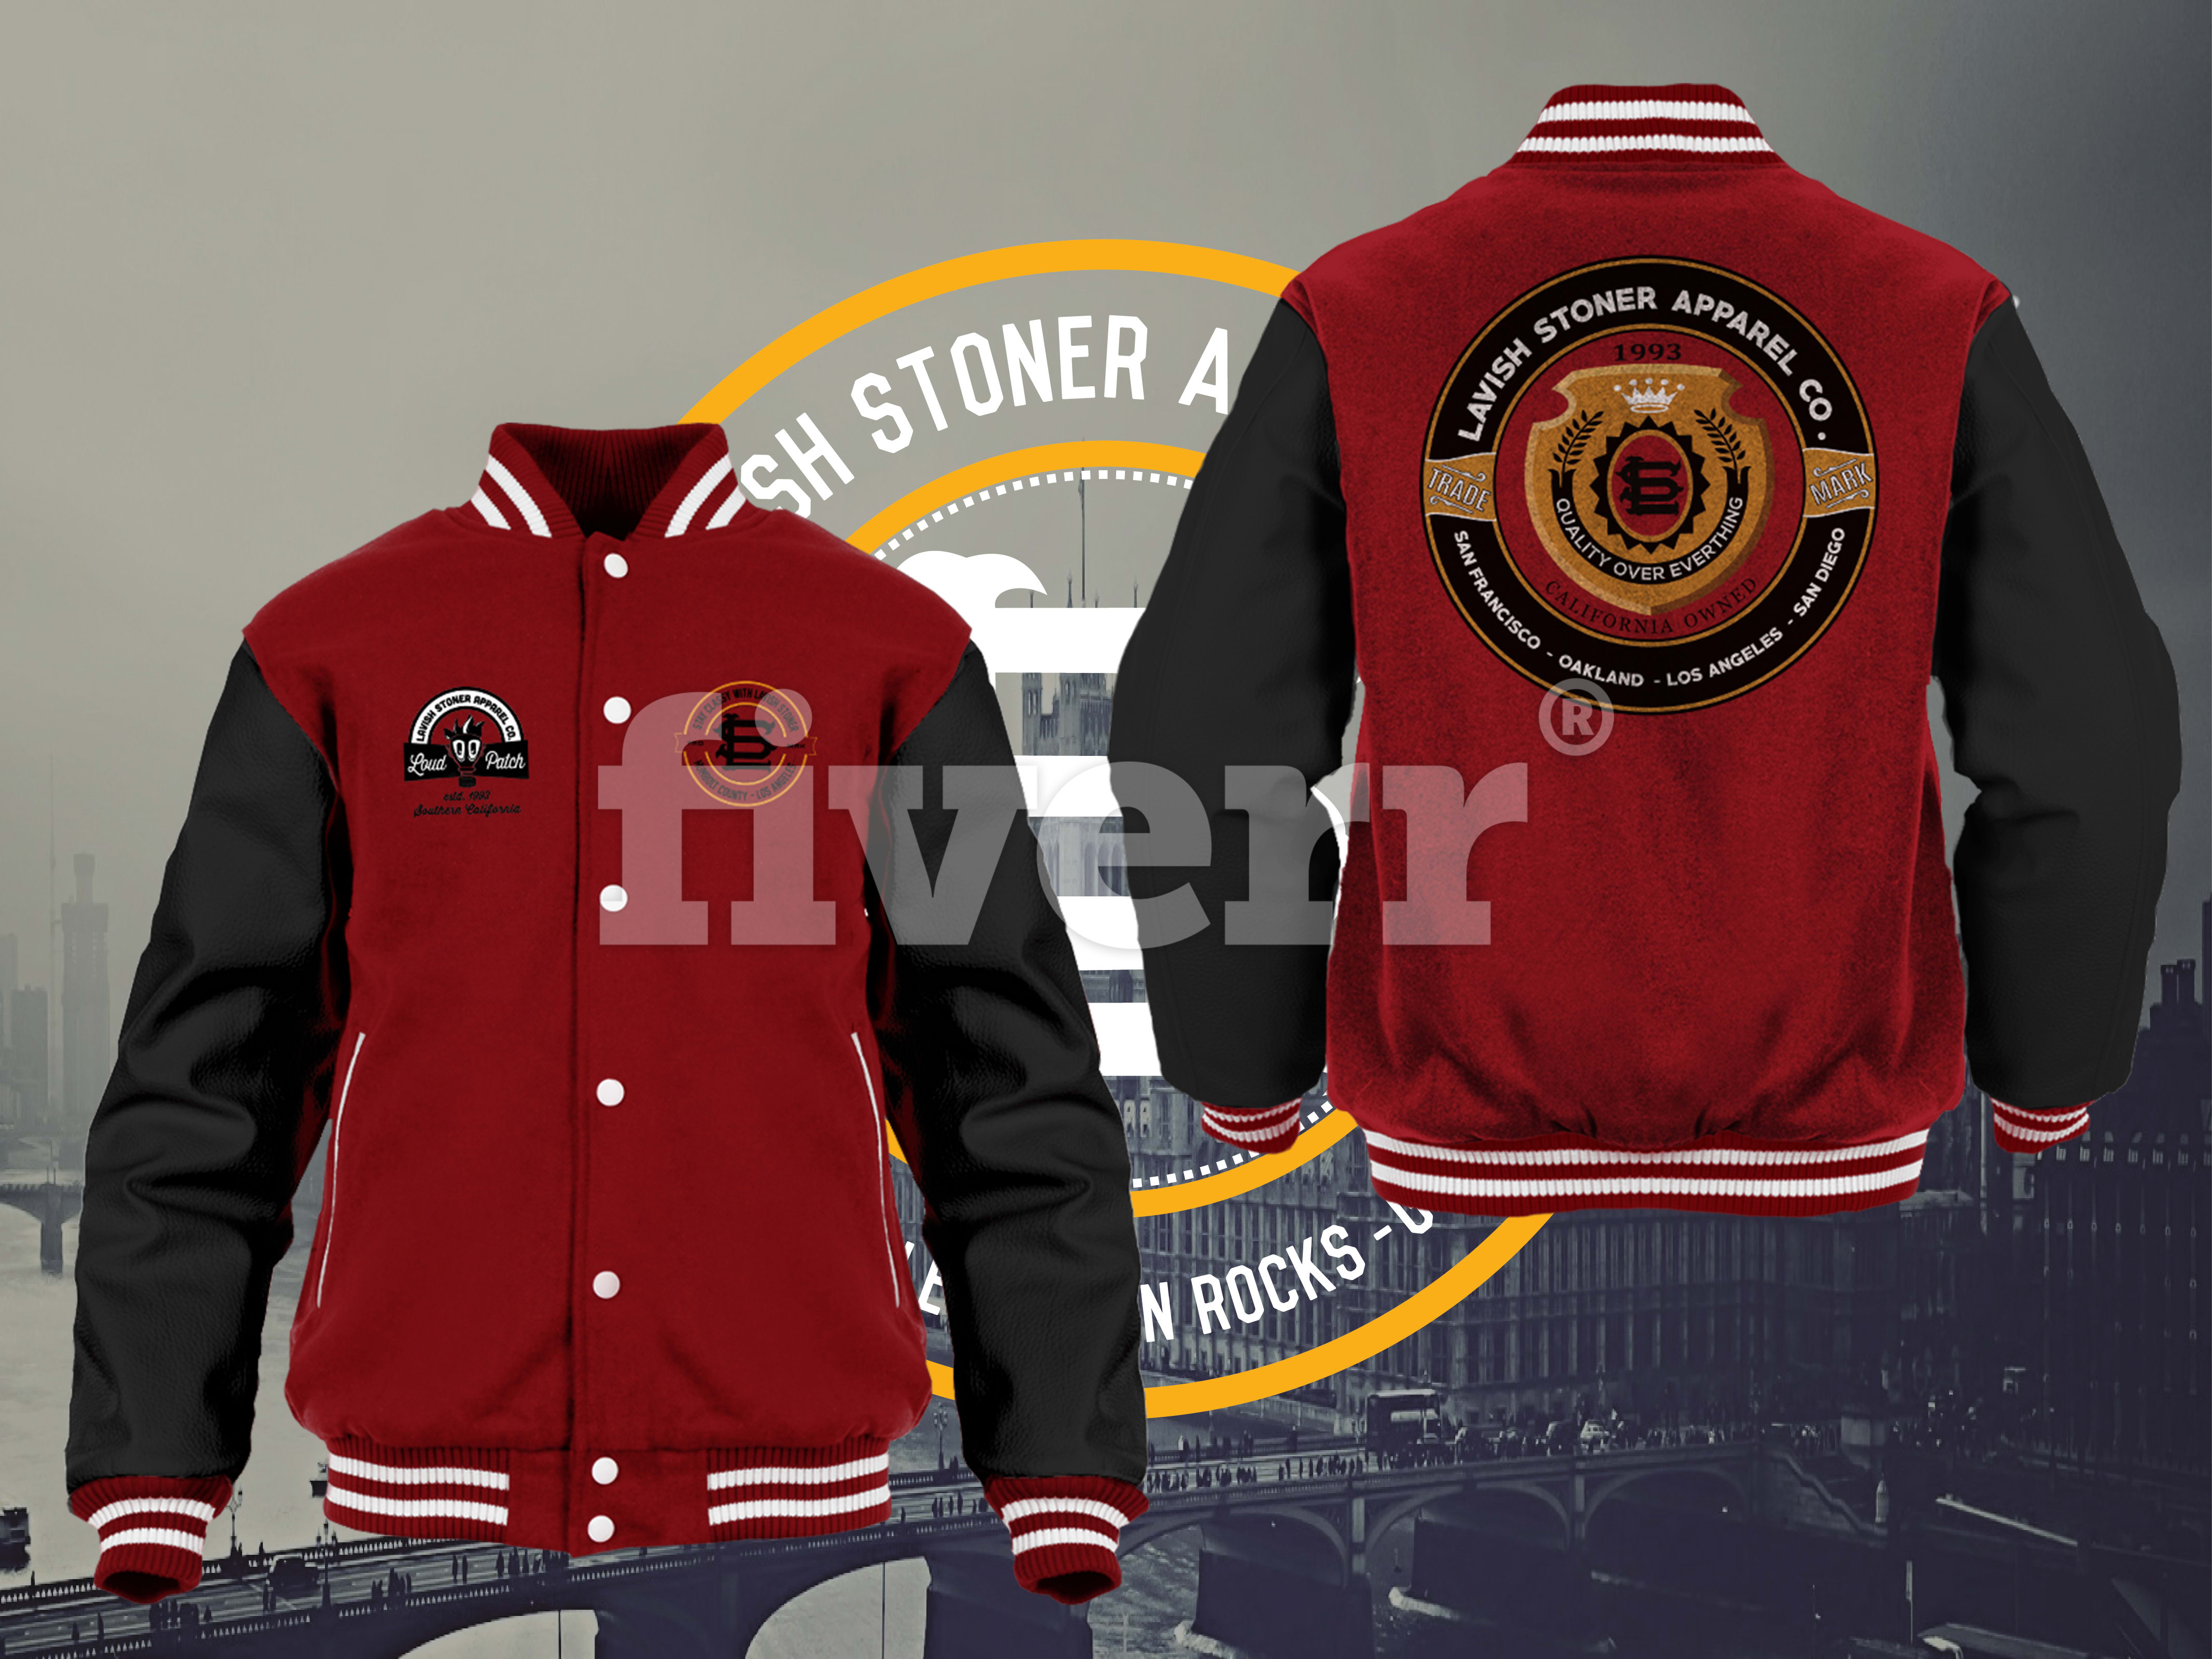 Download Create a college varsity jacket mockup by Trymzoslo